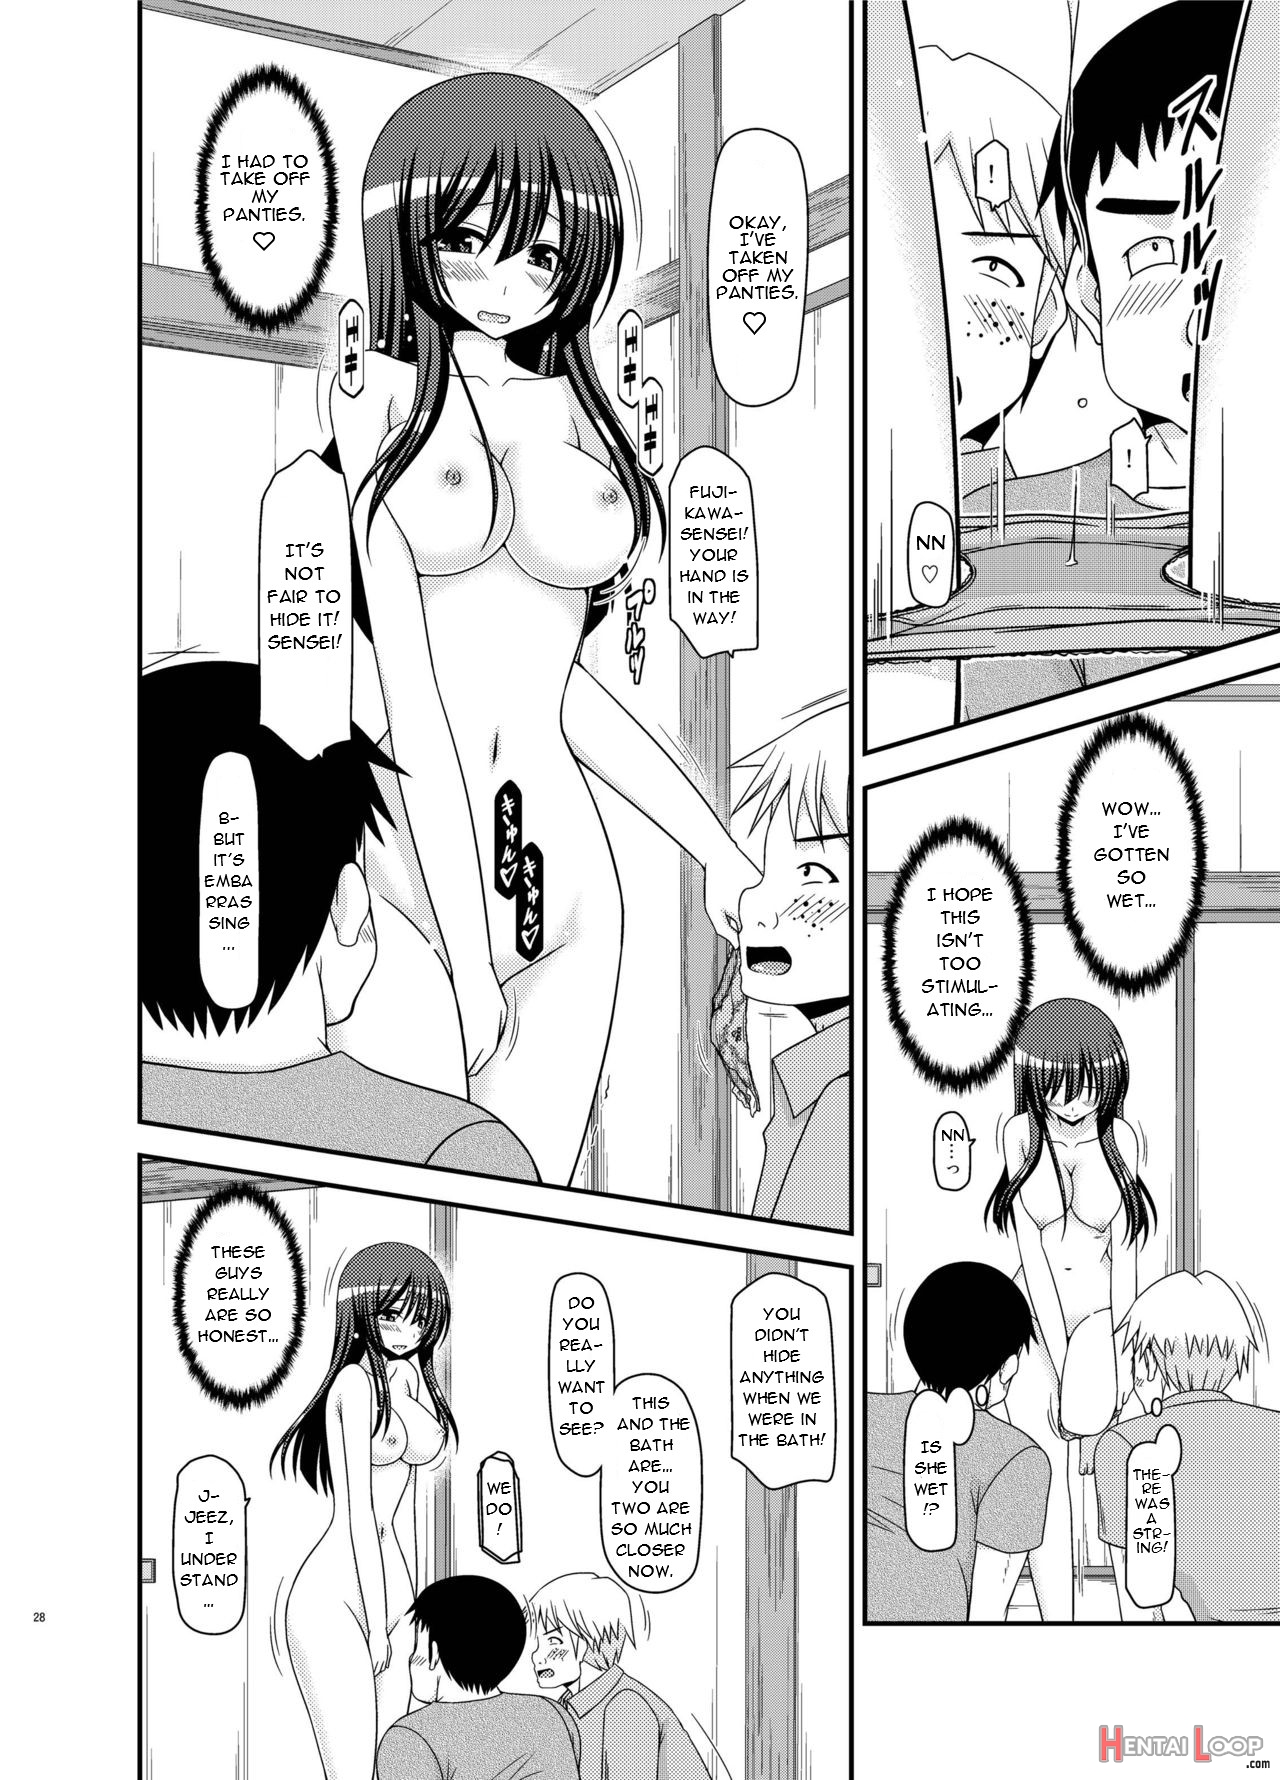 Exhibitionist Girl Diary Chapter 20 page 28